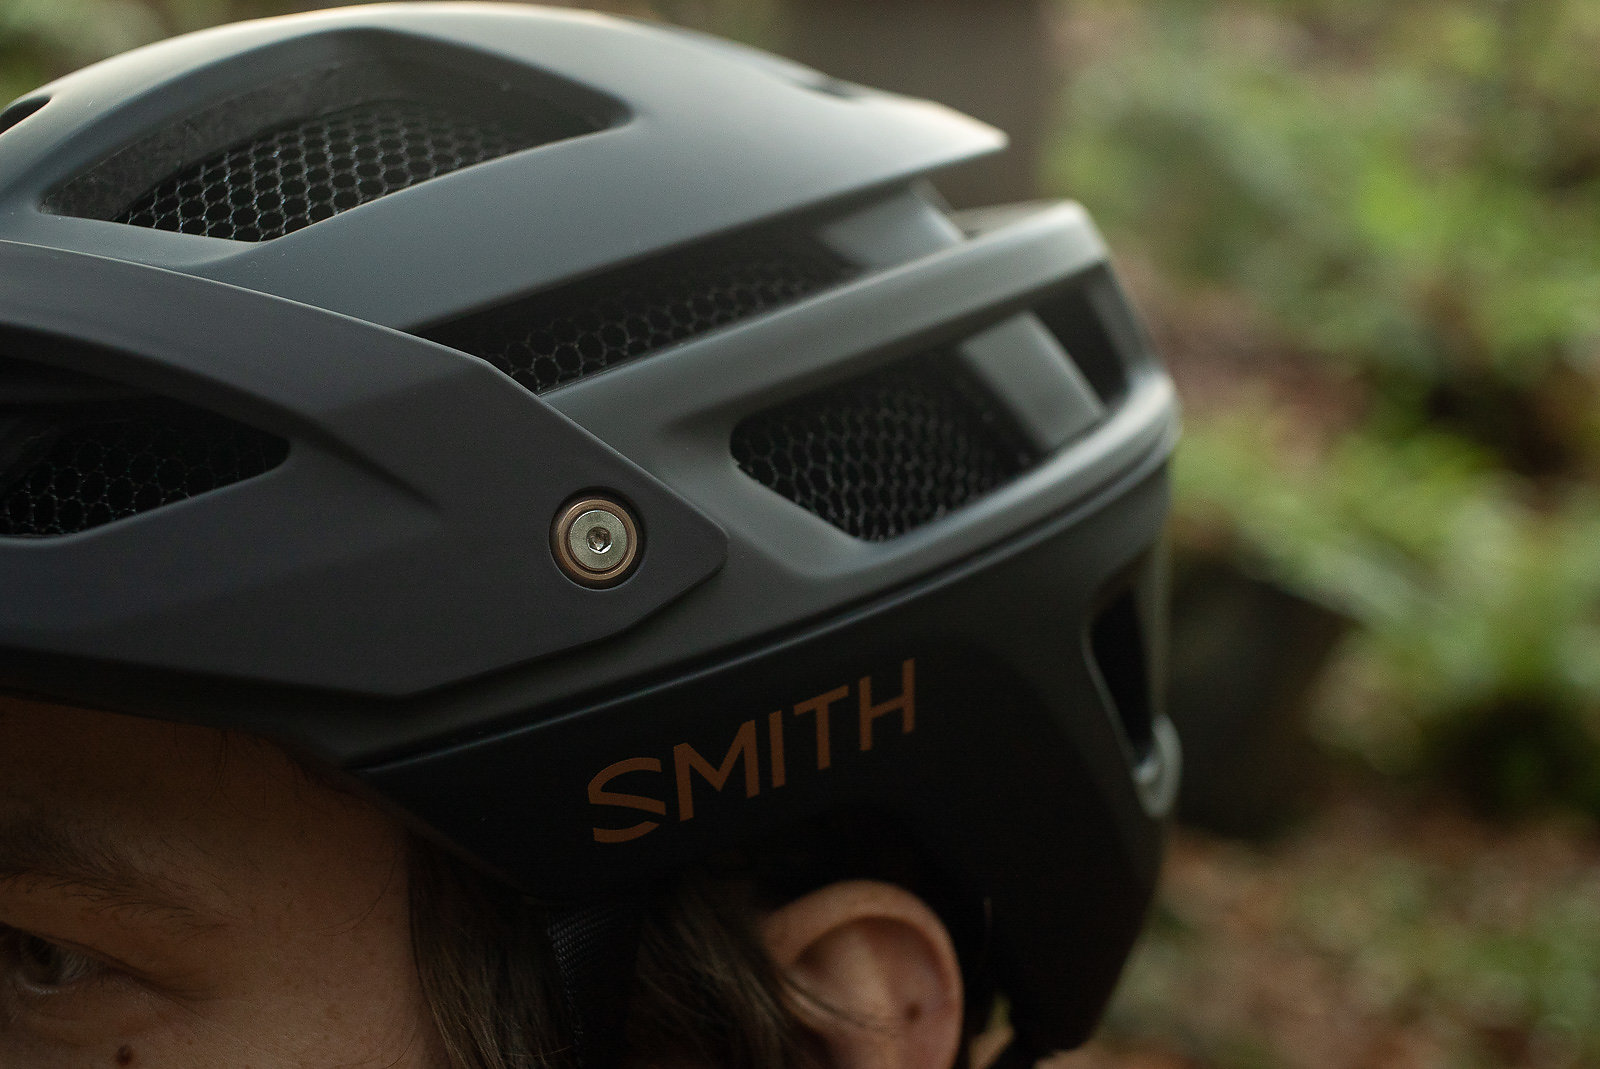 smith forefront 2 mips mtb helmet